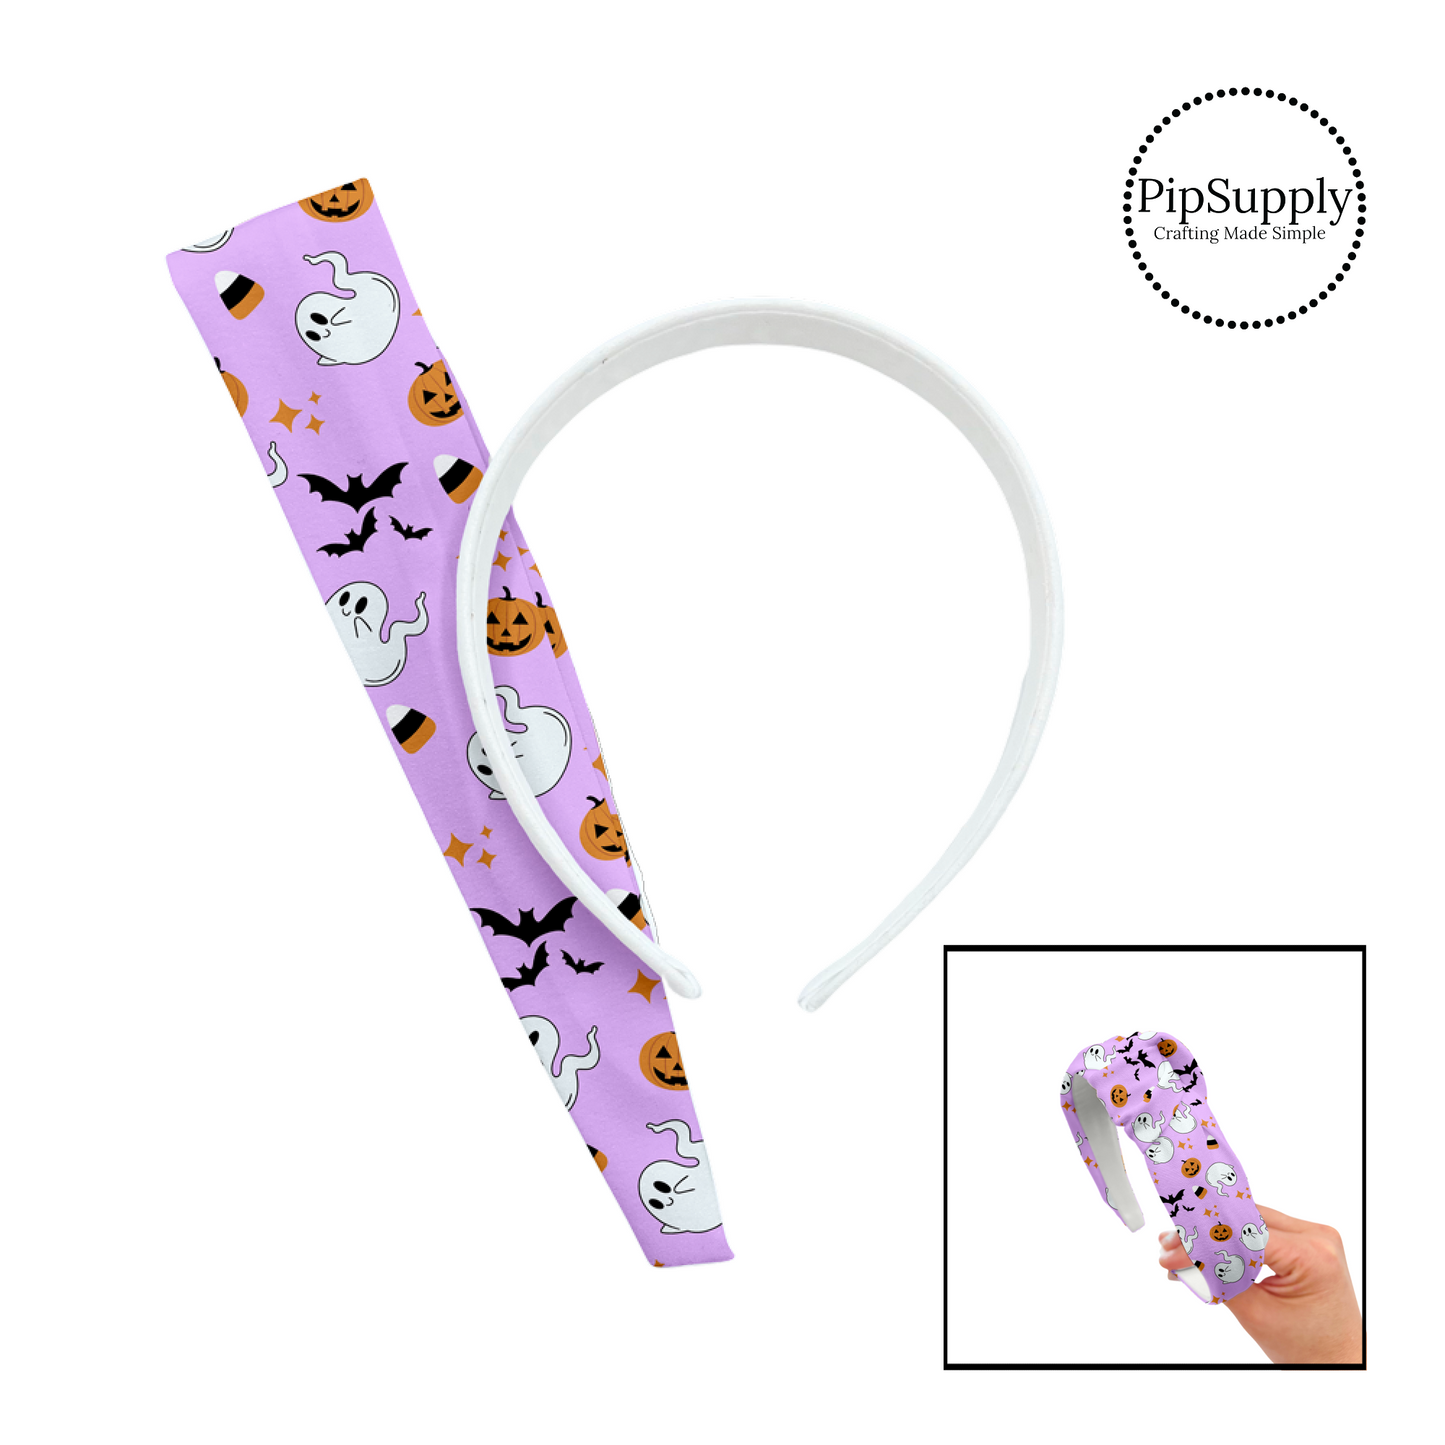 Candy corn, white ghost, pumpkins, bats, and stars on purple knotted headband kit